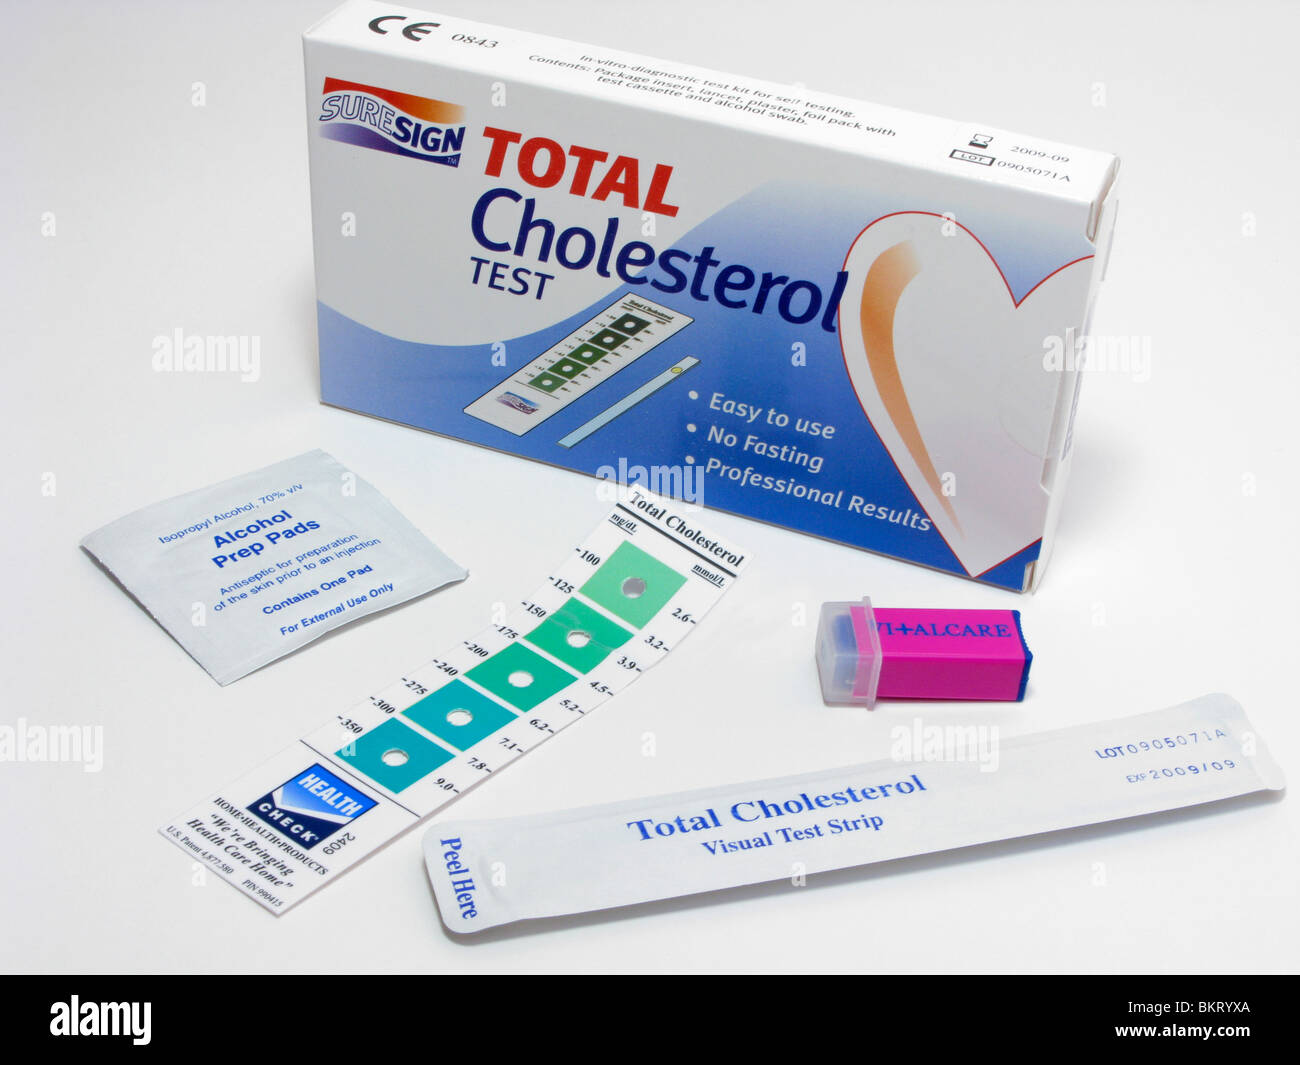 cholesterol self testing kit for in - vitro diagnostic use at home between gp visits Stock Photo